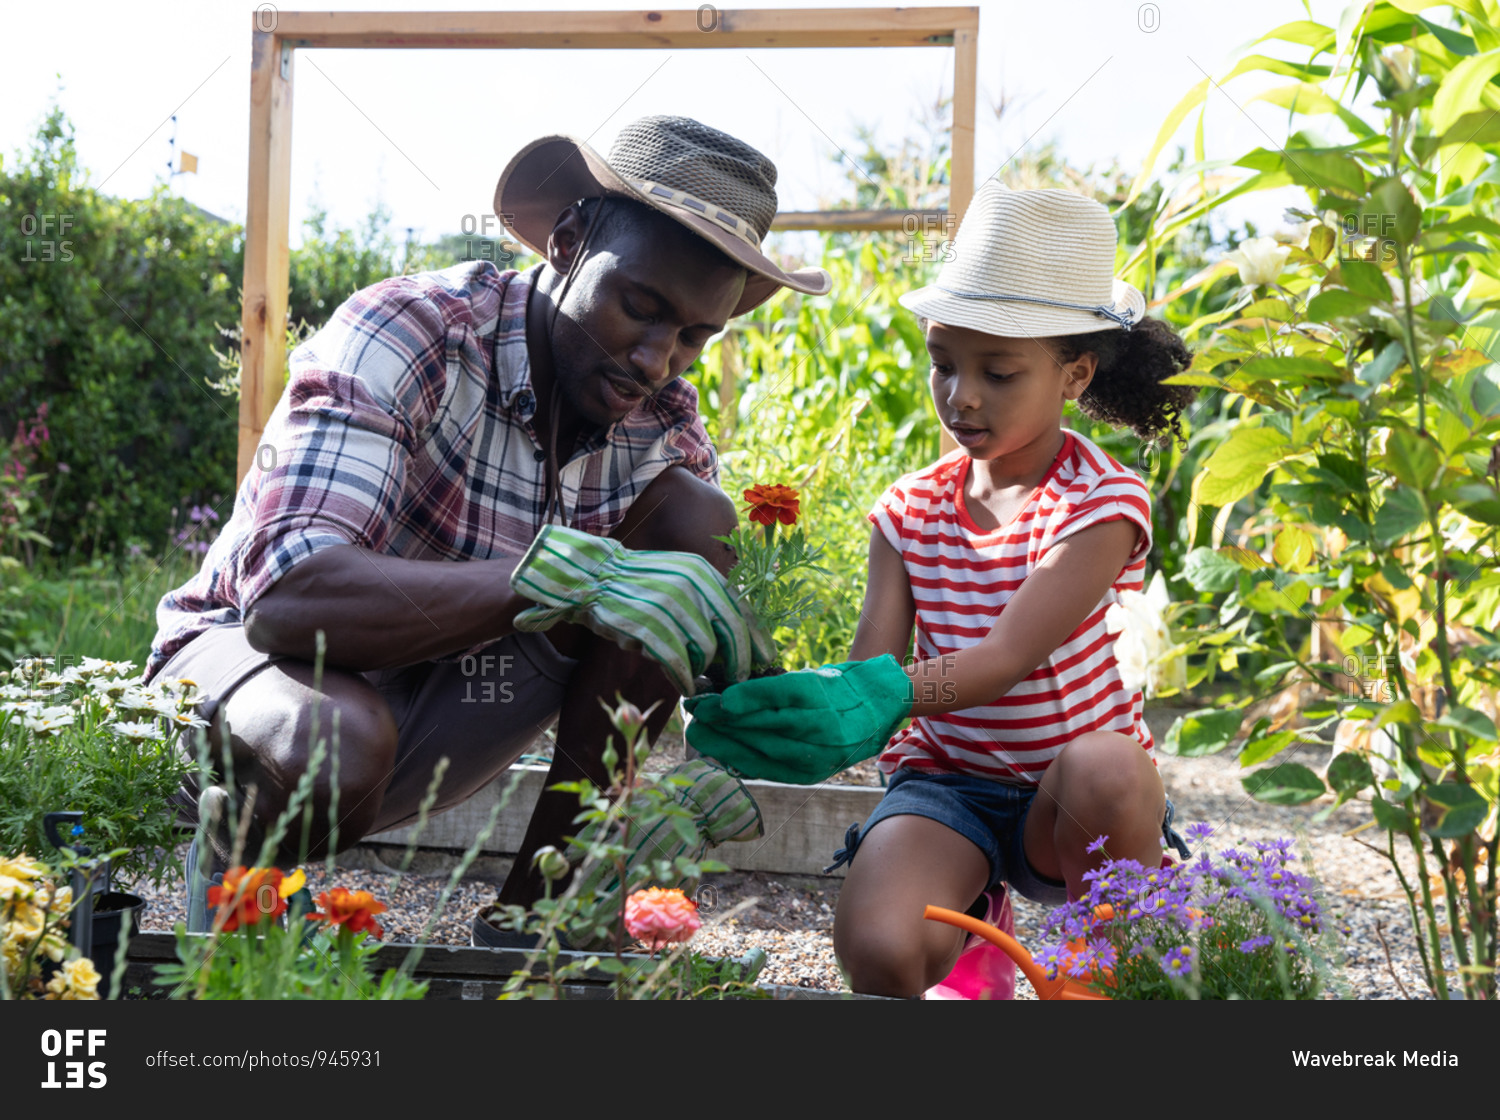 African American girl and her father social distancing at home during quarantine lockdown, spending time in their garden together, planting flowers, on a sunny day.